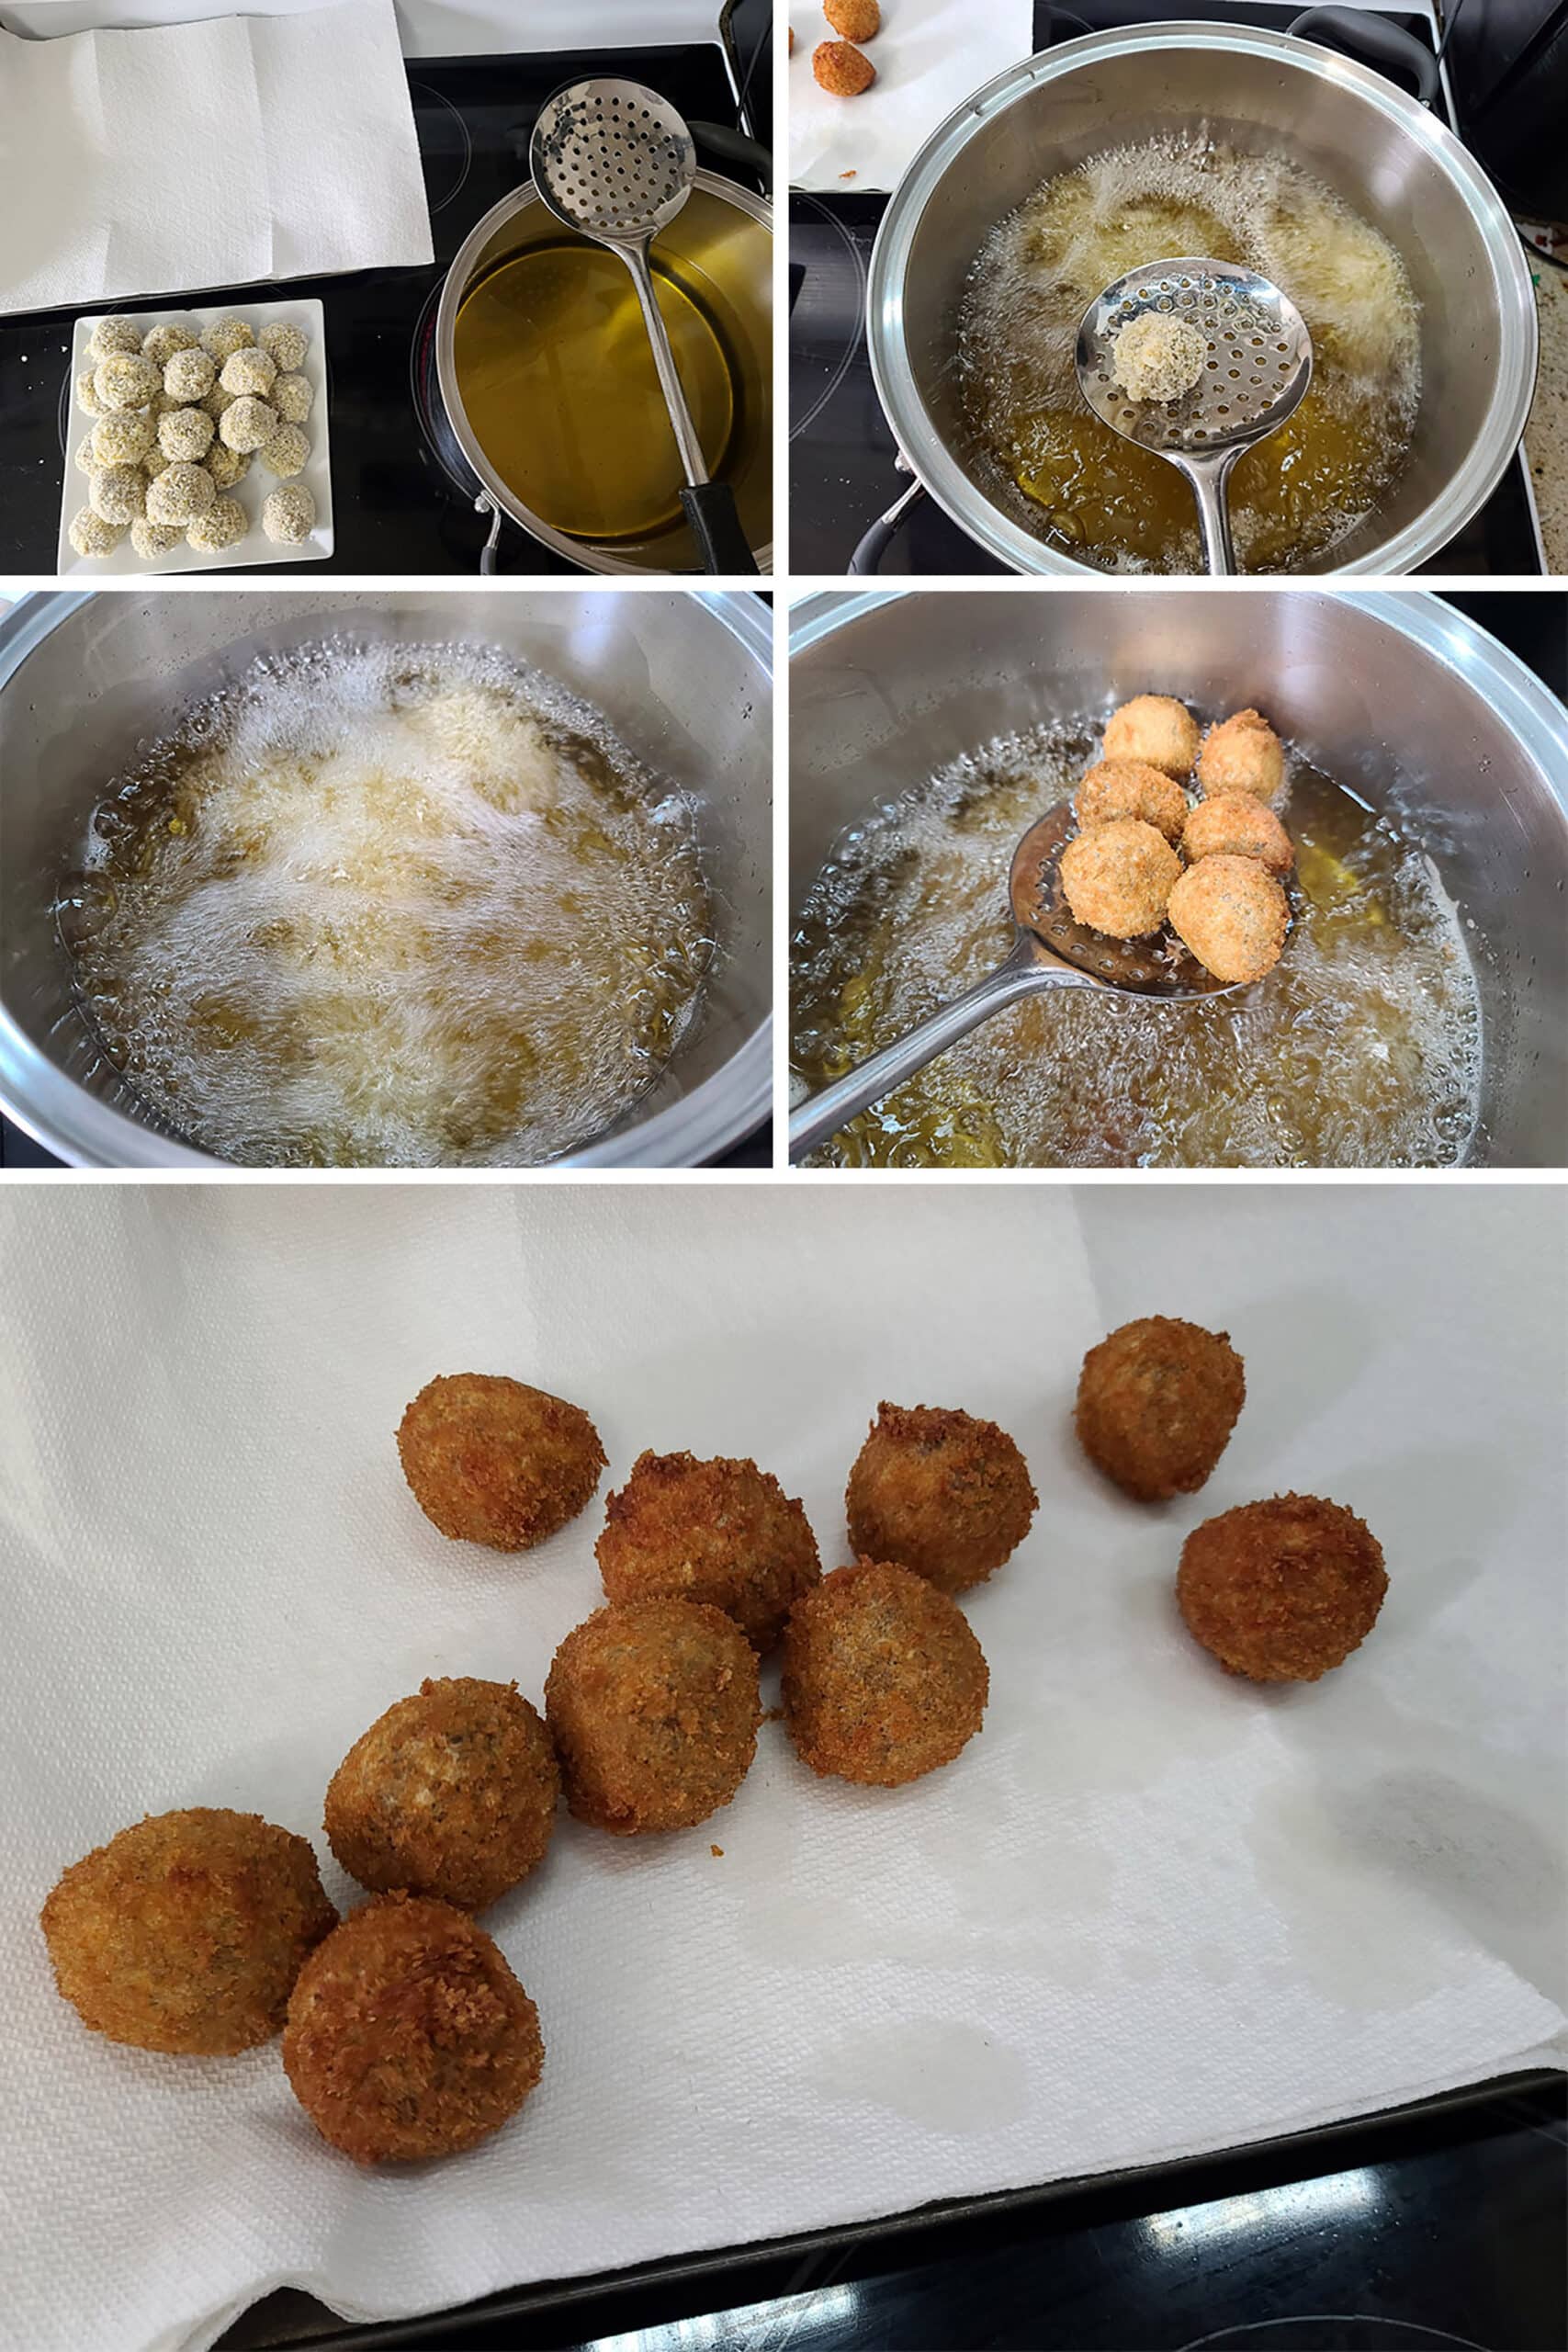 5 part image showing the mushroom arancini balls being deep fried then drained on paper towels.